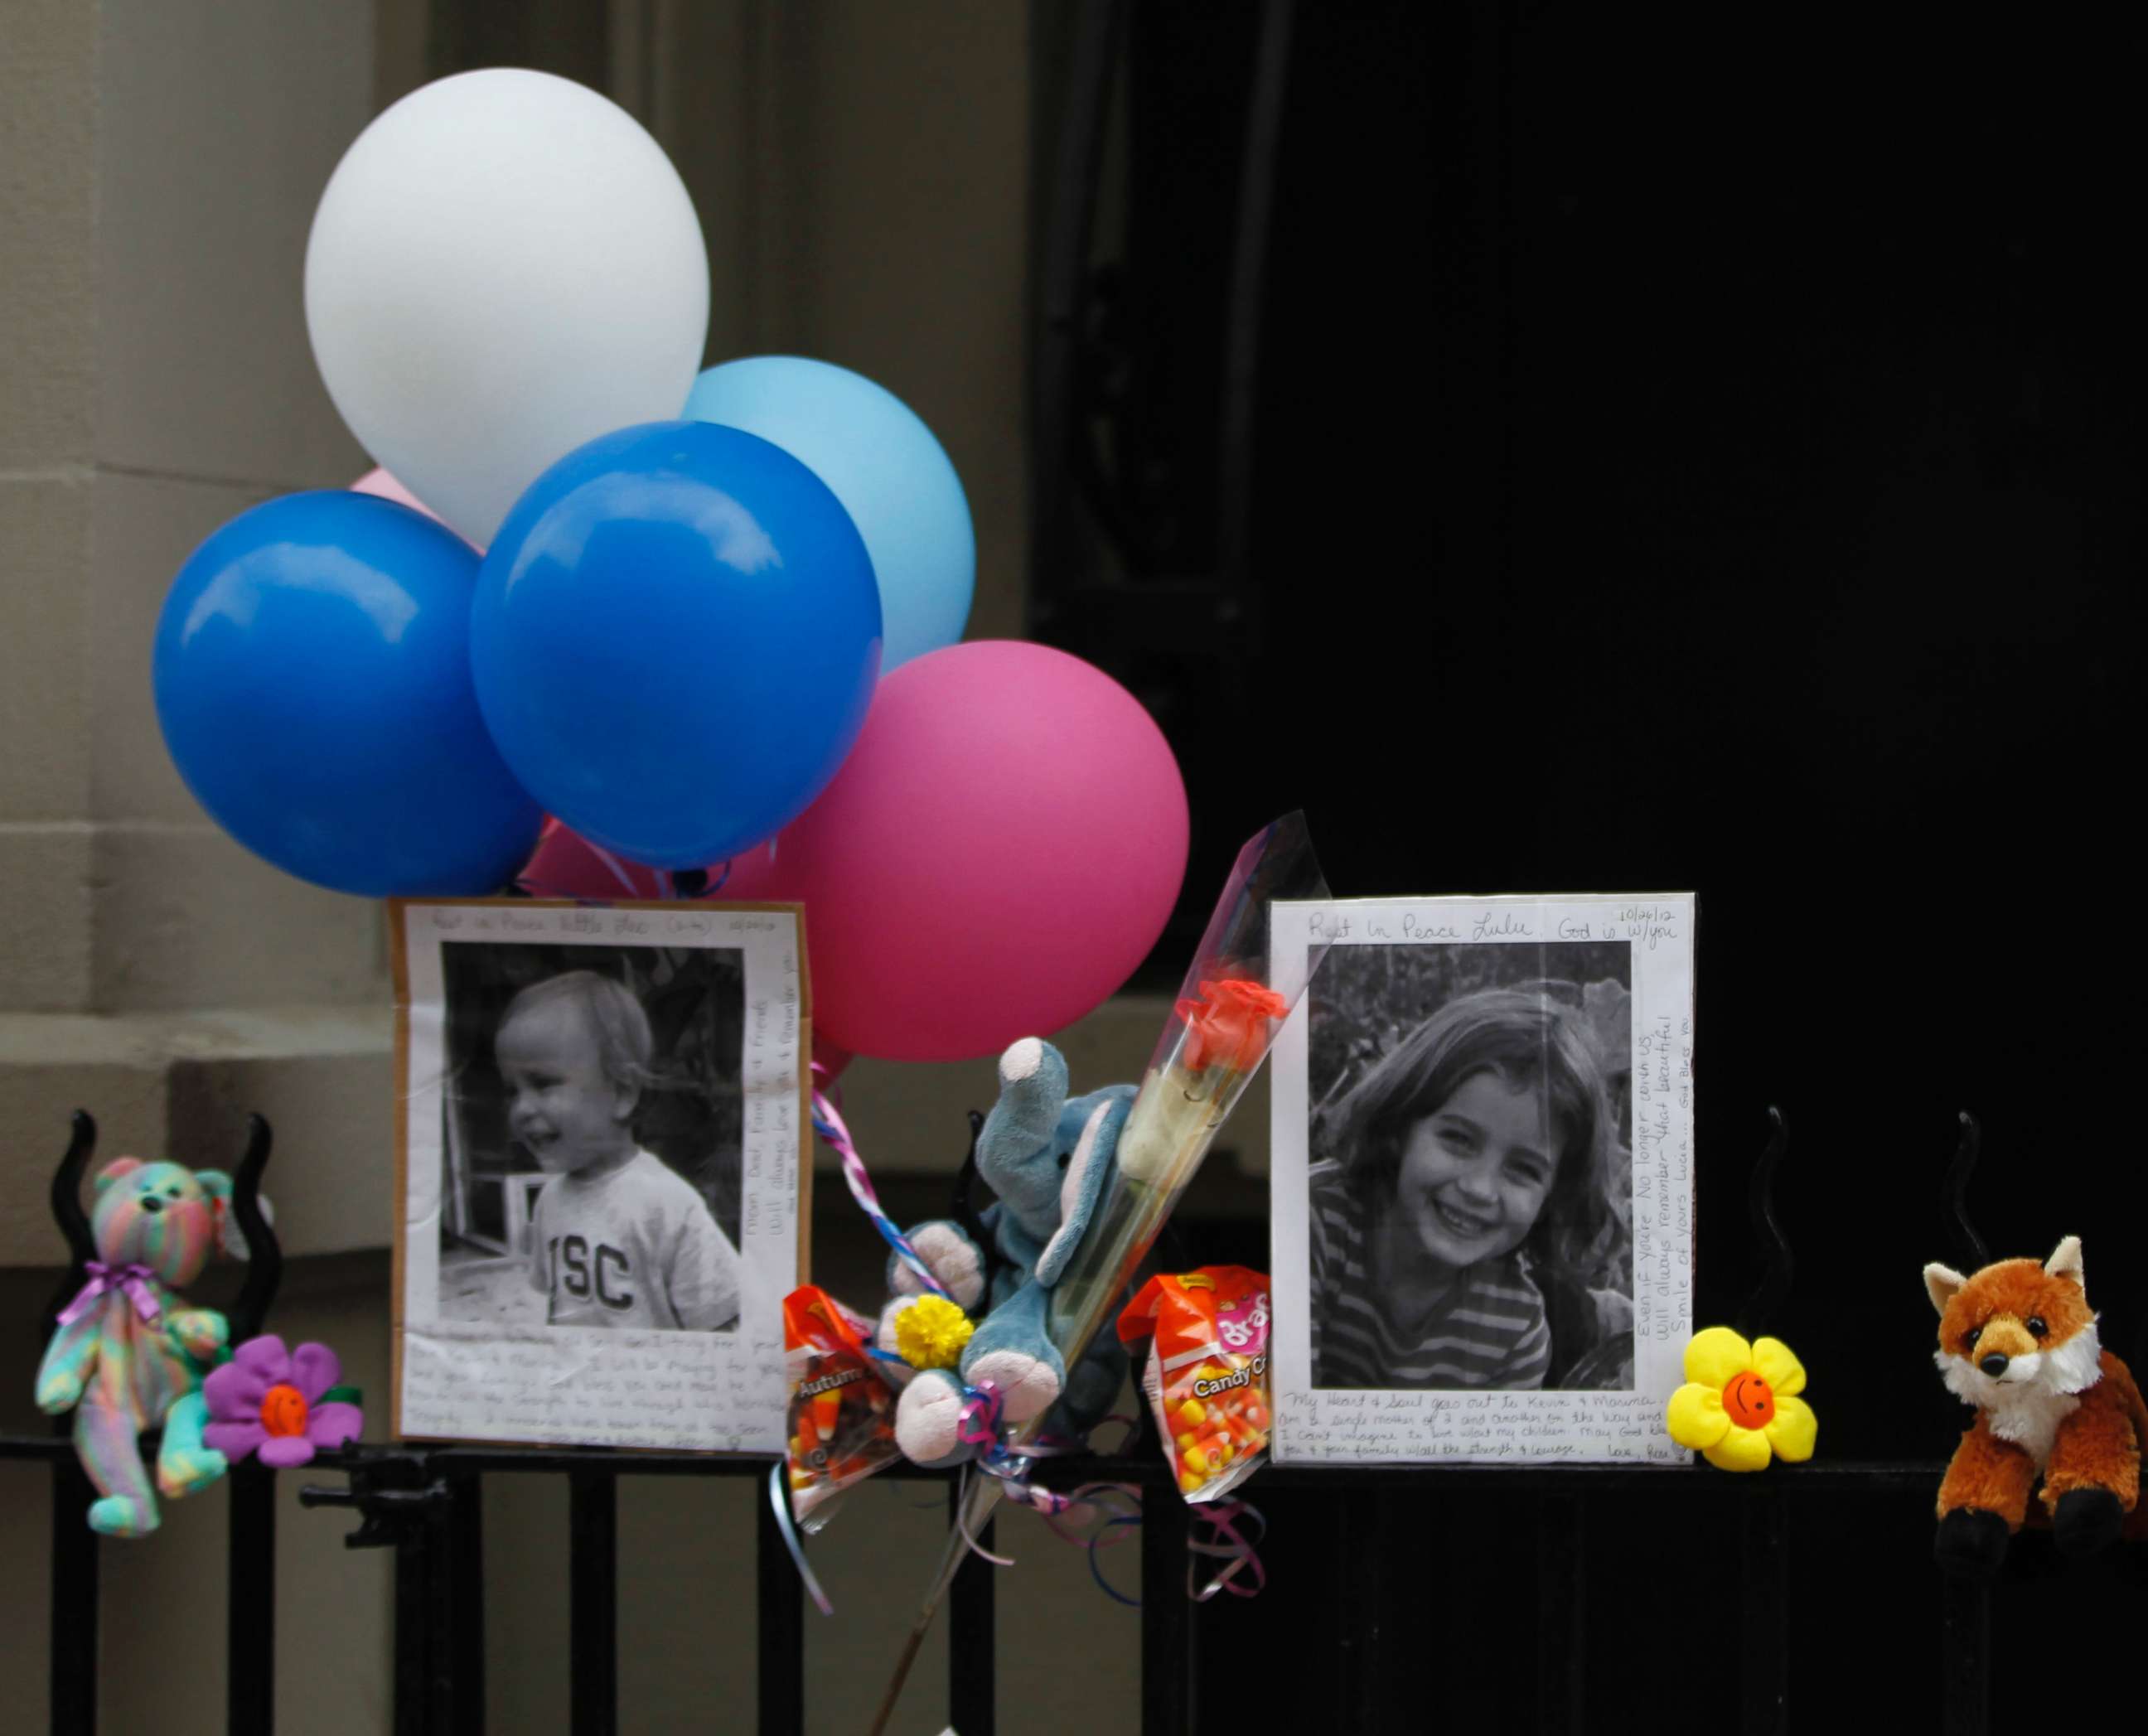 PHOTO: Photographs of the two children stabbed by their nanny are displayed alongside balloons and stuffed animals at a memorial outside the apartment building were they lived in New York City, Oct. 27, 2012.